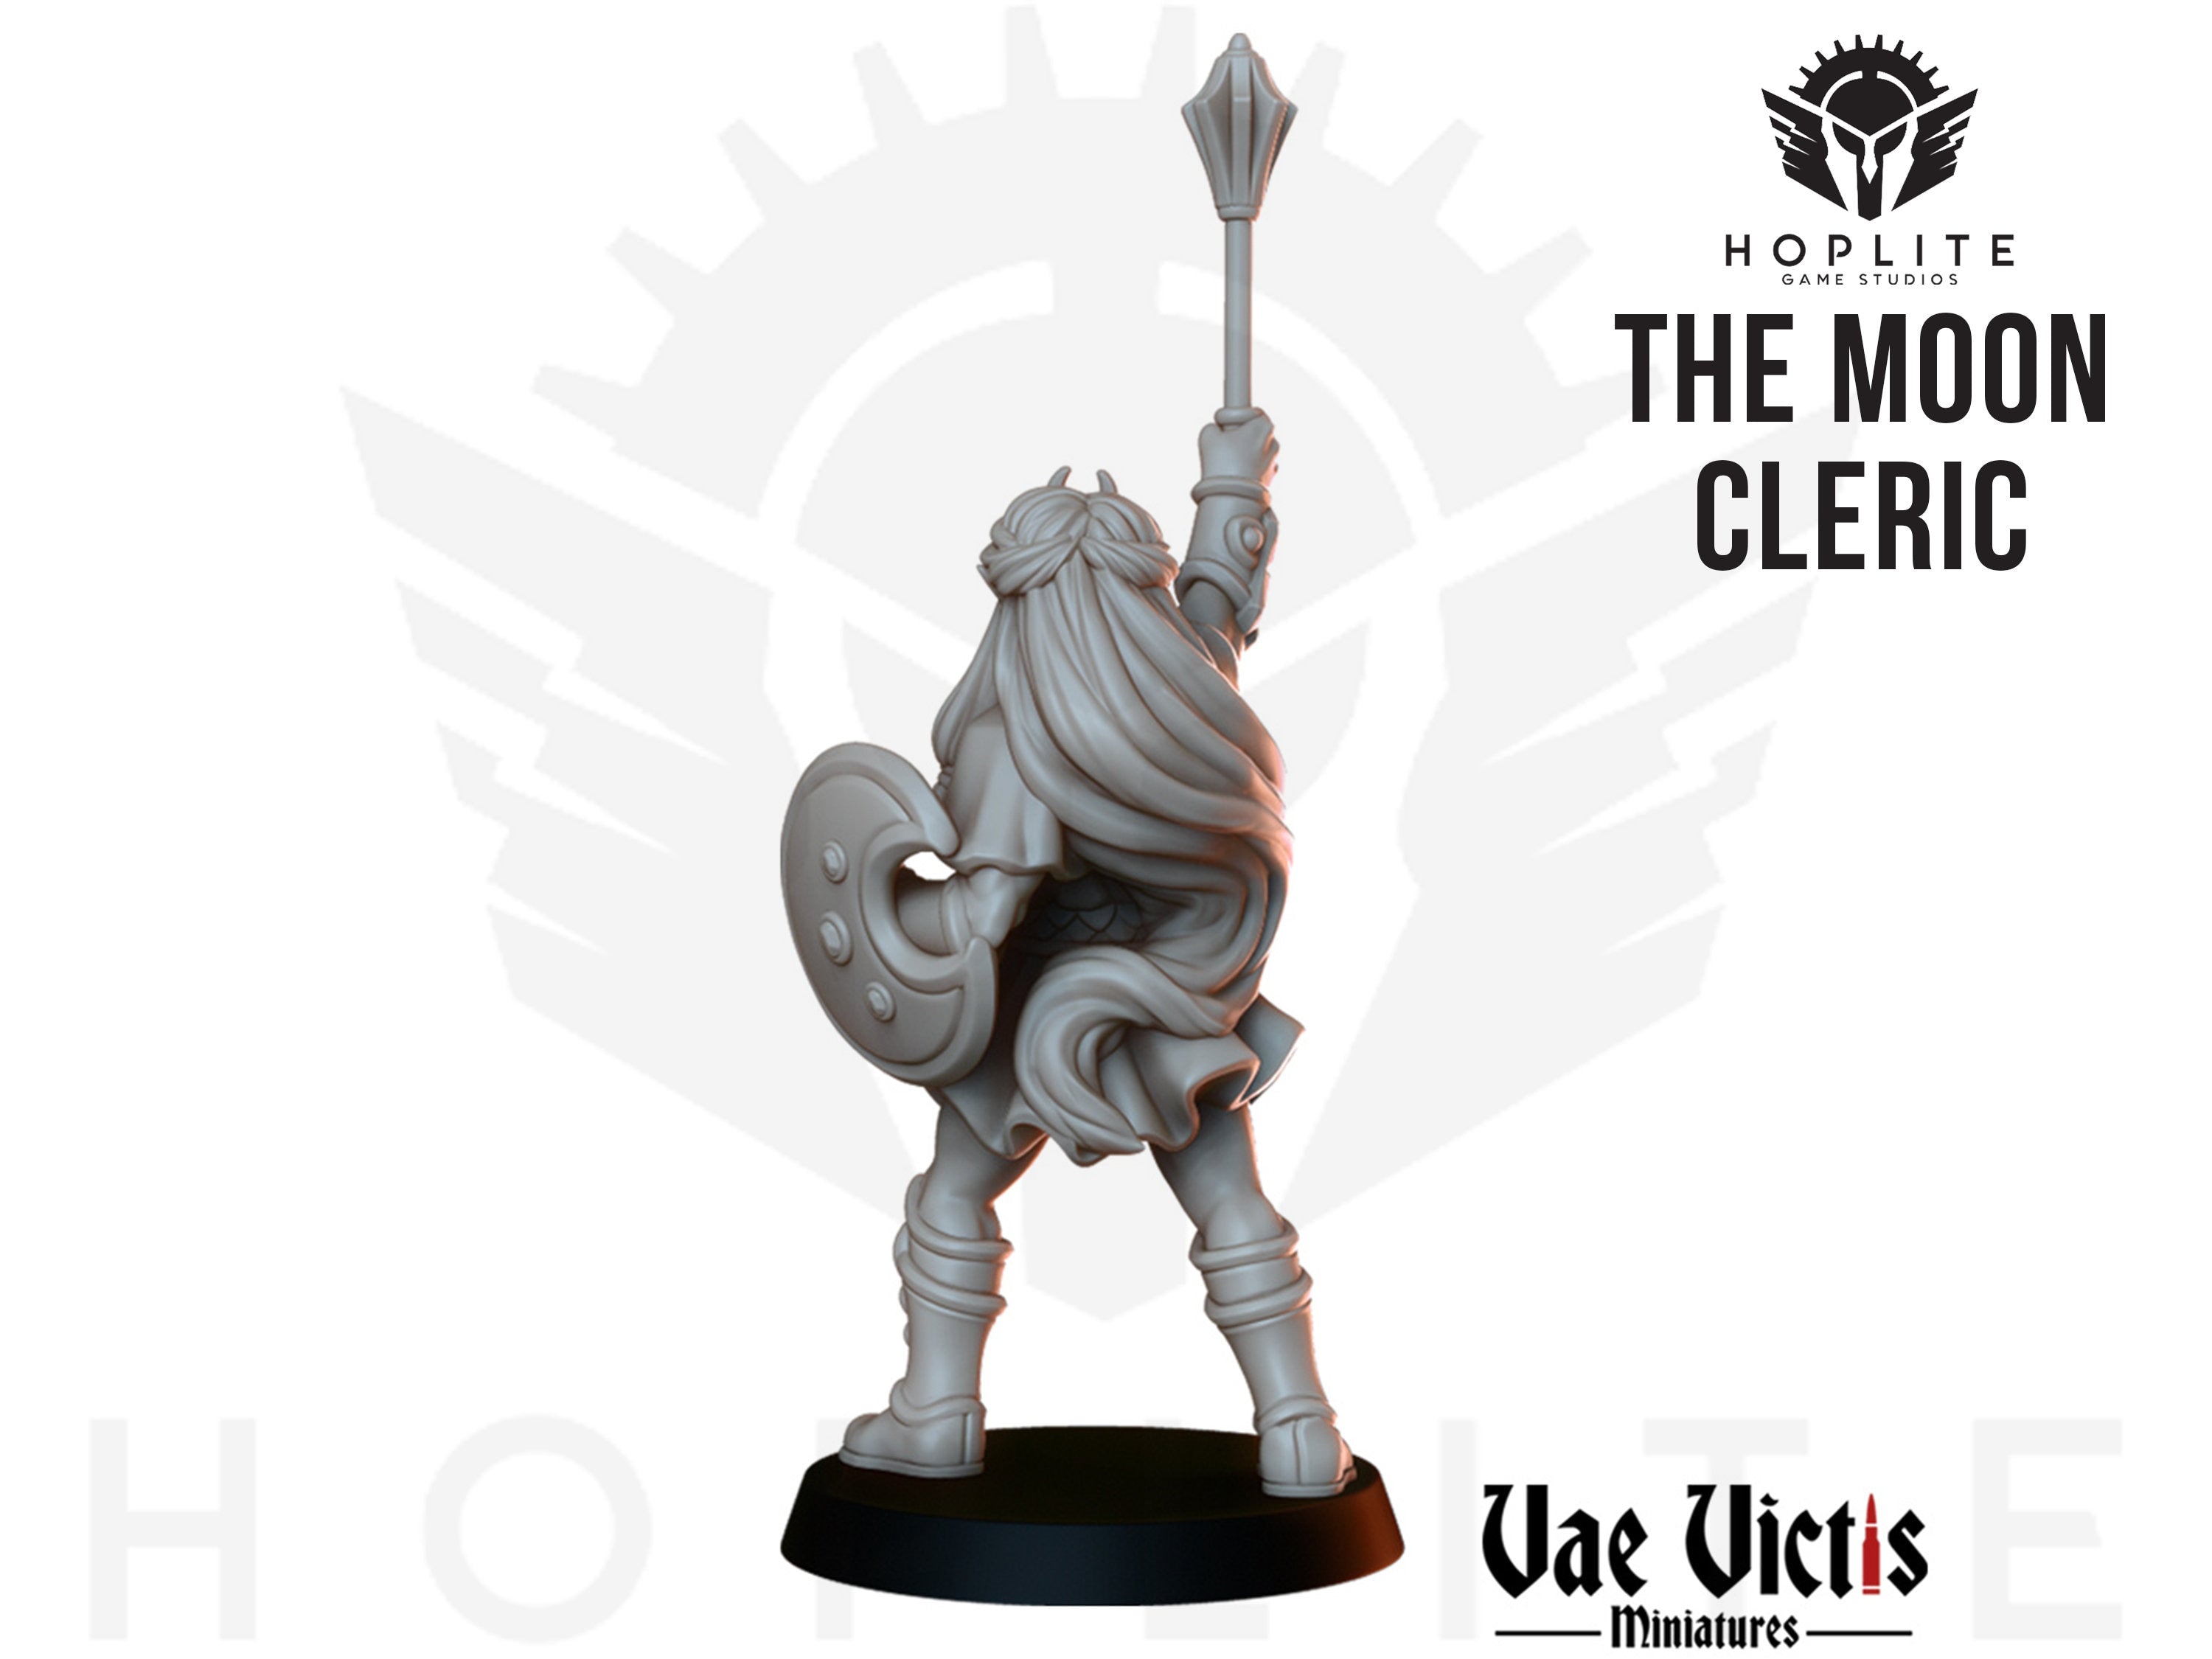 The Moon Cleric